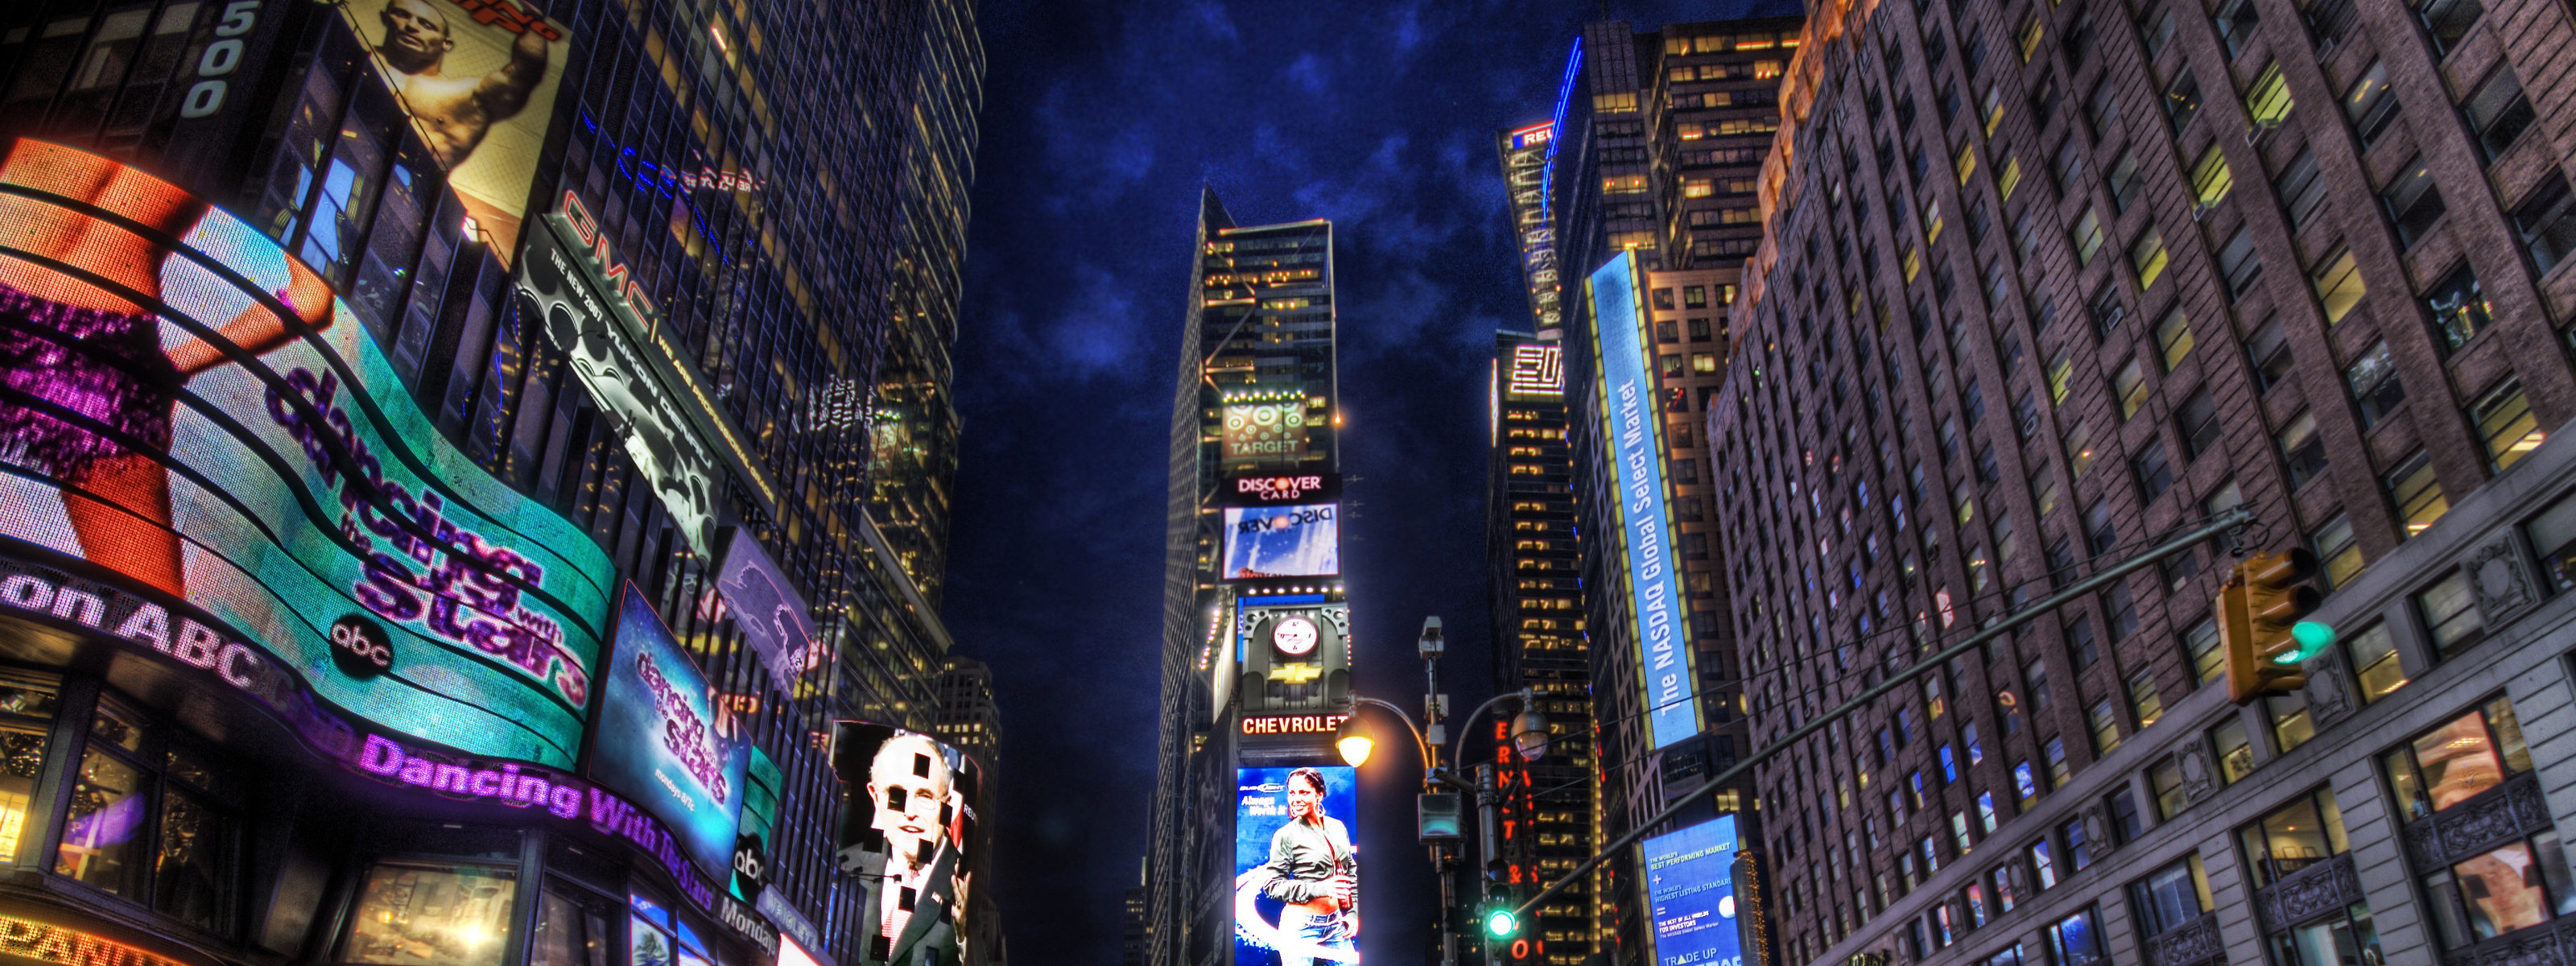 New York City Art Prints And Posters Wall Murals Buy A Poster Modern